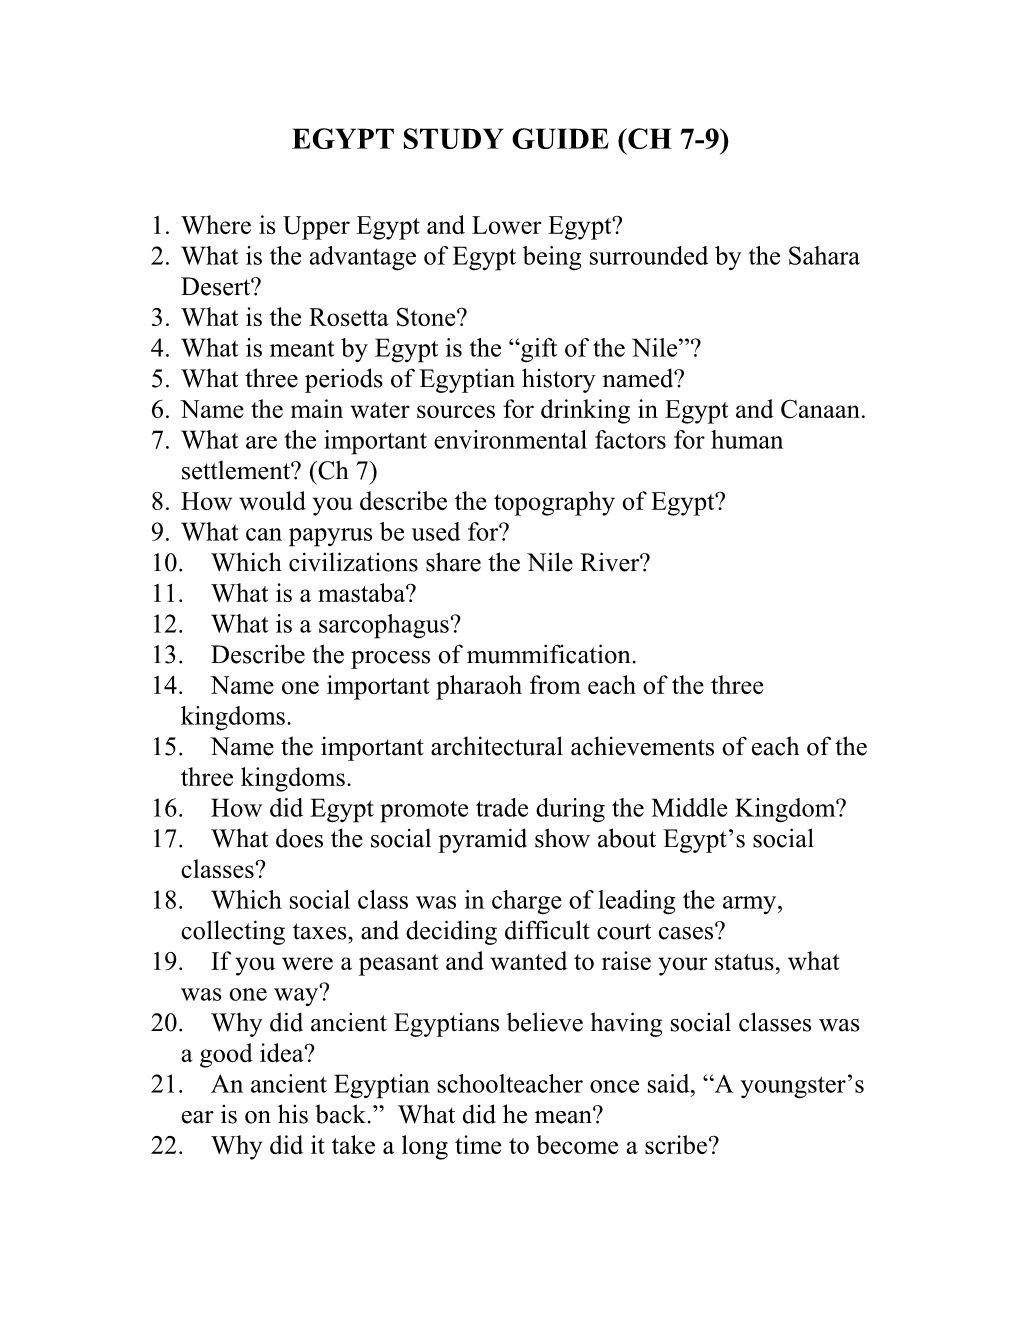 Egypt Study Guide (Ch 7-9)